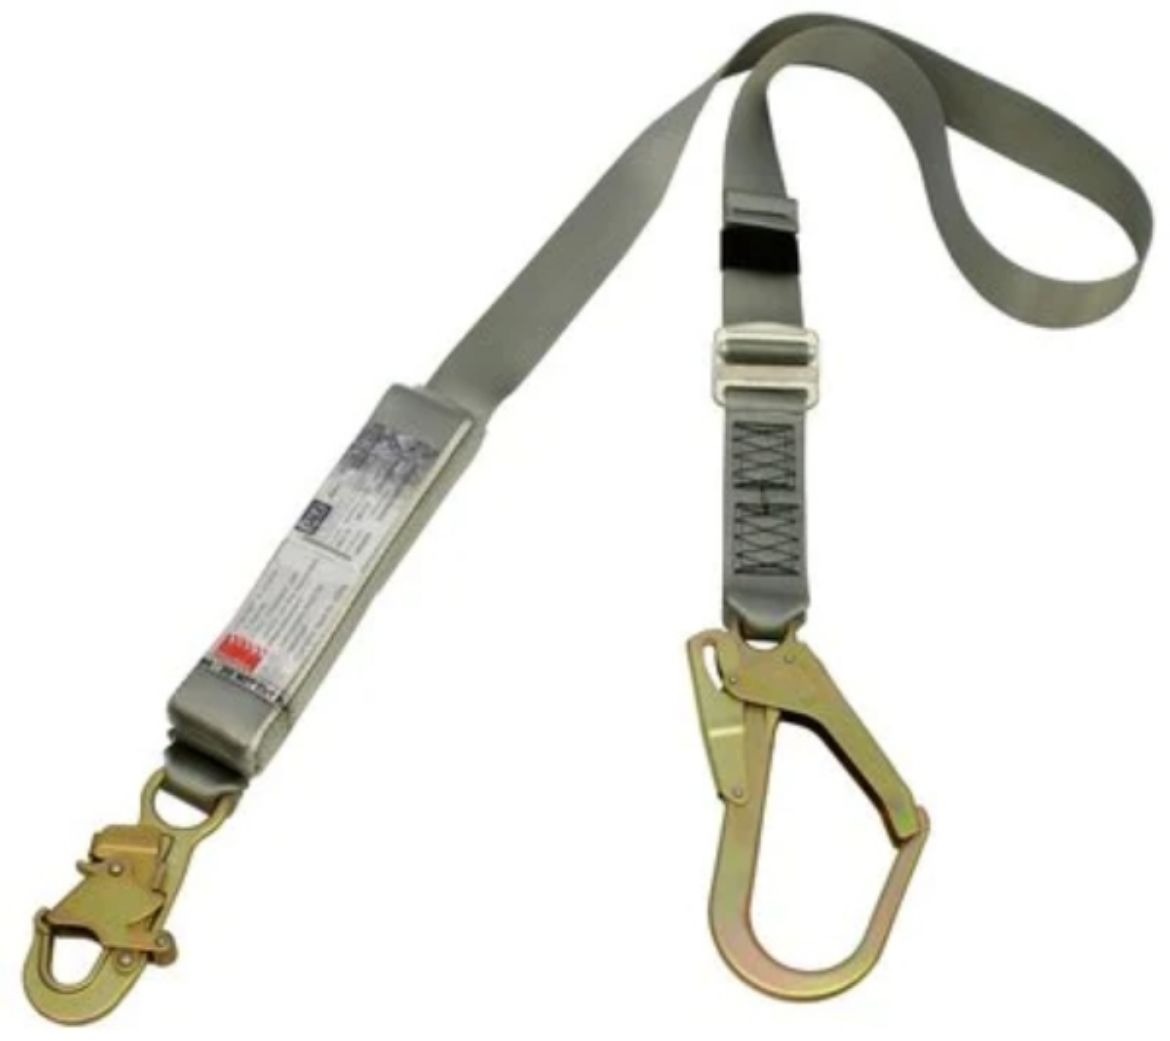 Picture of Z51200934 WEB LANYARD, 2M ADJUSTABLE, WITH 9502116 AND 07153 SCAFF HOOK